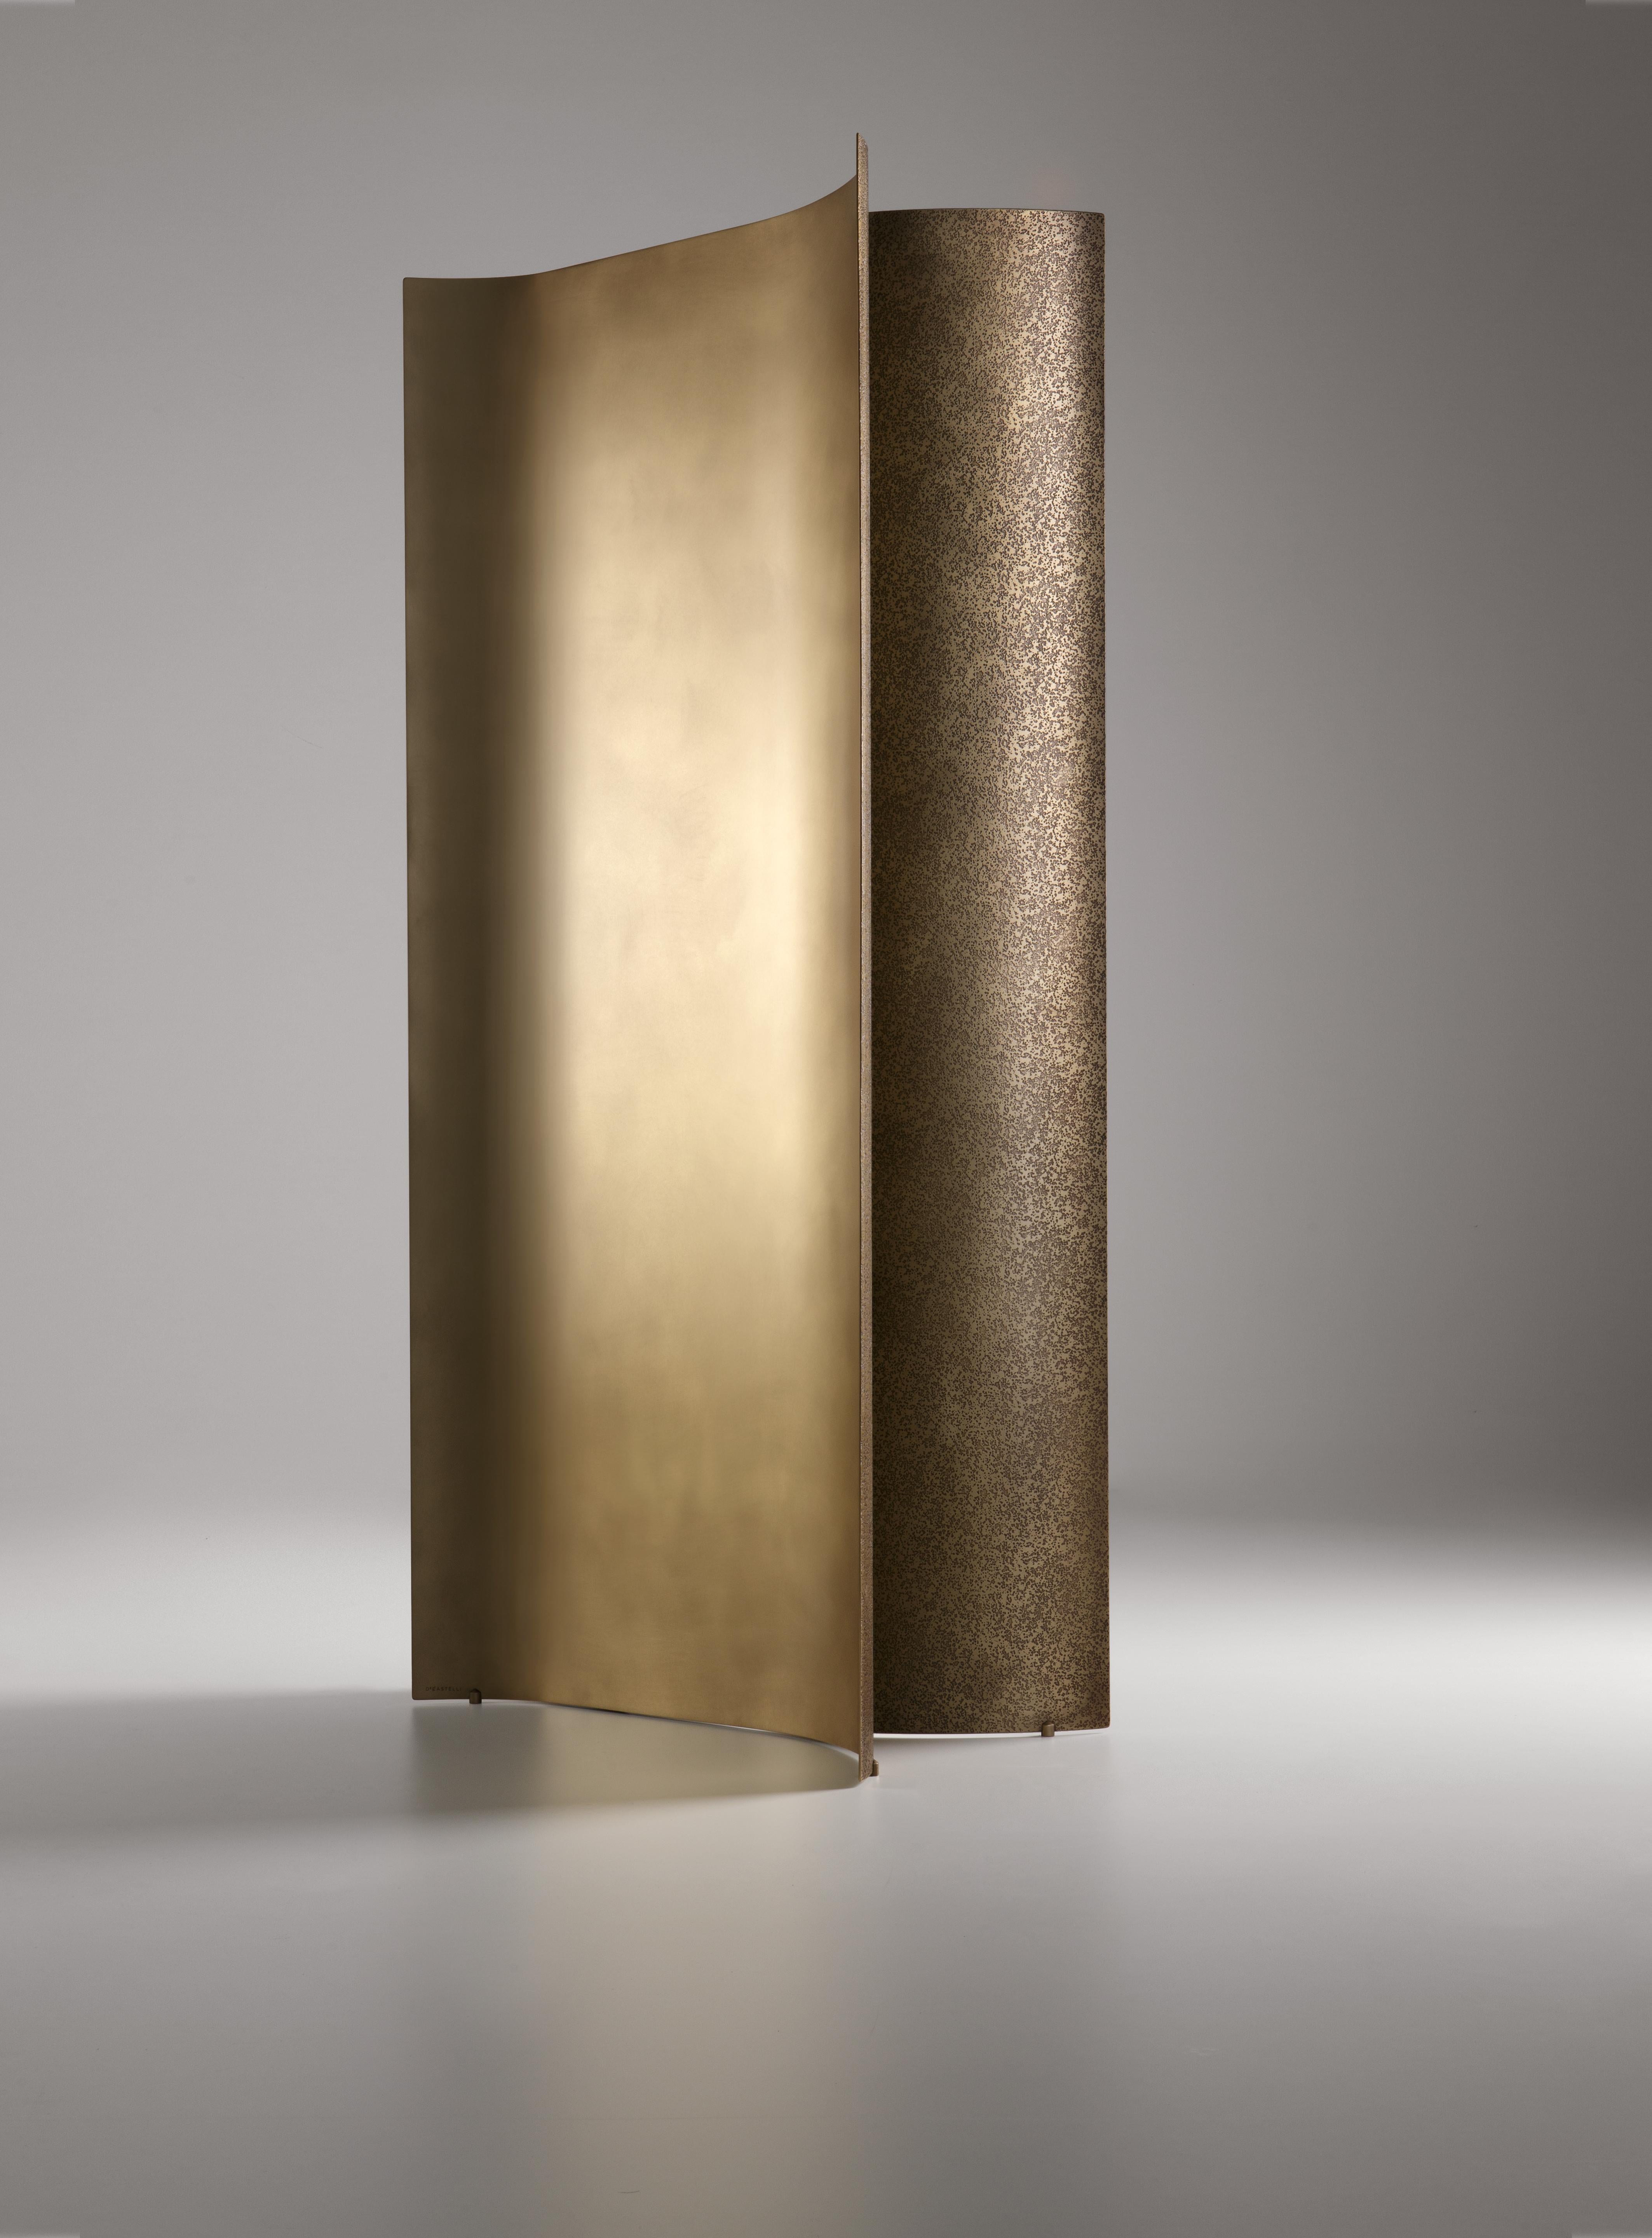 Monolìte is an architectonic partition that, like a solid body smoothed by nature’s erosive elements, evokes geological formations along its surface.
This partition is a vertical element constituted by two symmetrical, concave brass metal sheets